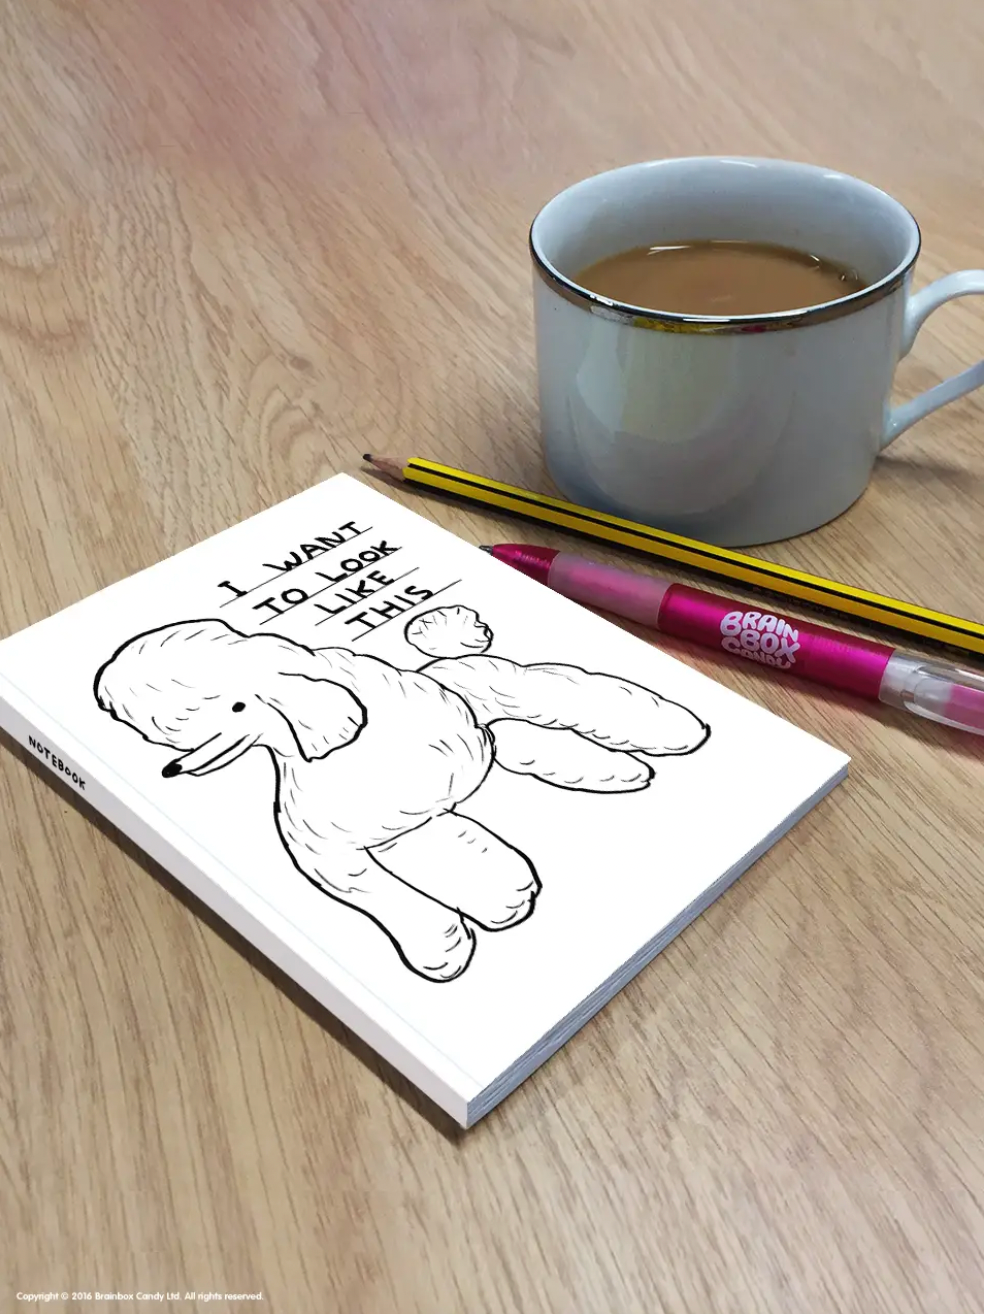 David Shrigley x Brainbox Candy I Want To Look Like This A6 Notebook | Prelude & Dawn | Los Angeles, CA